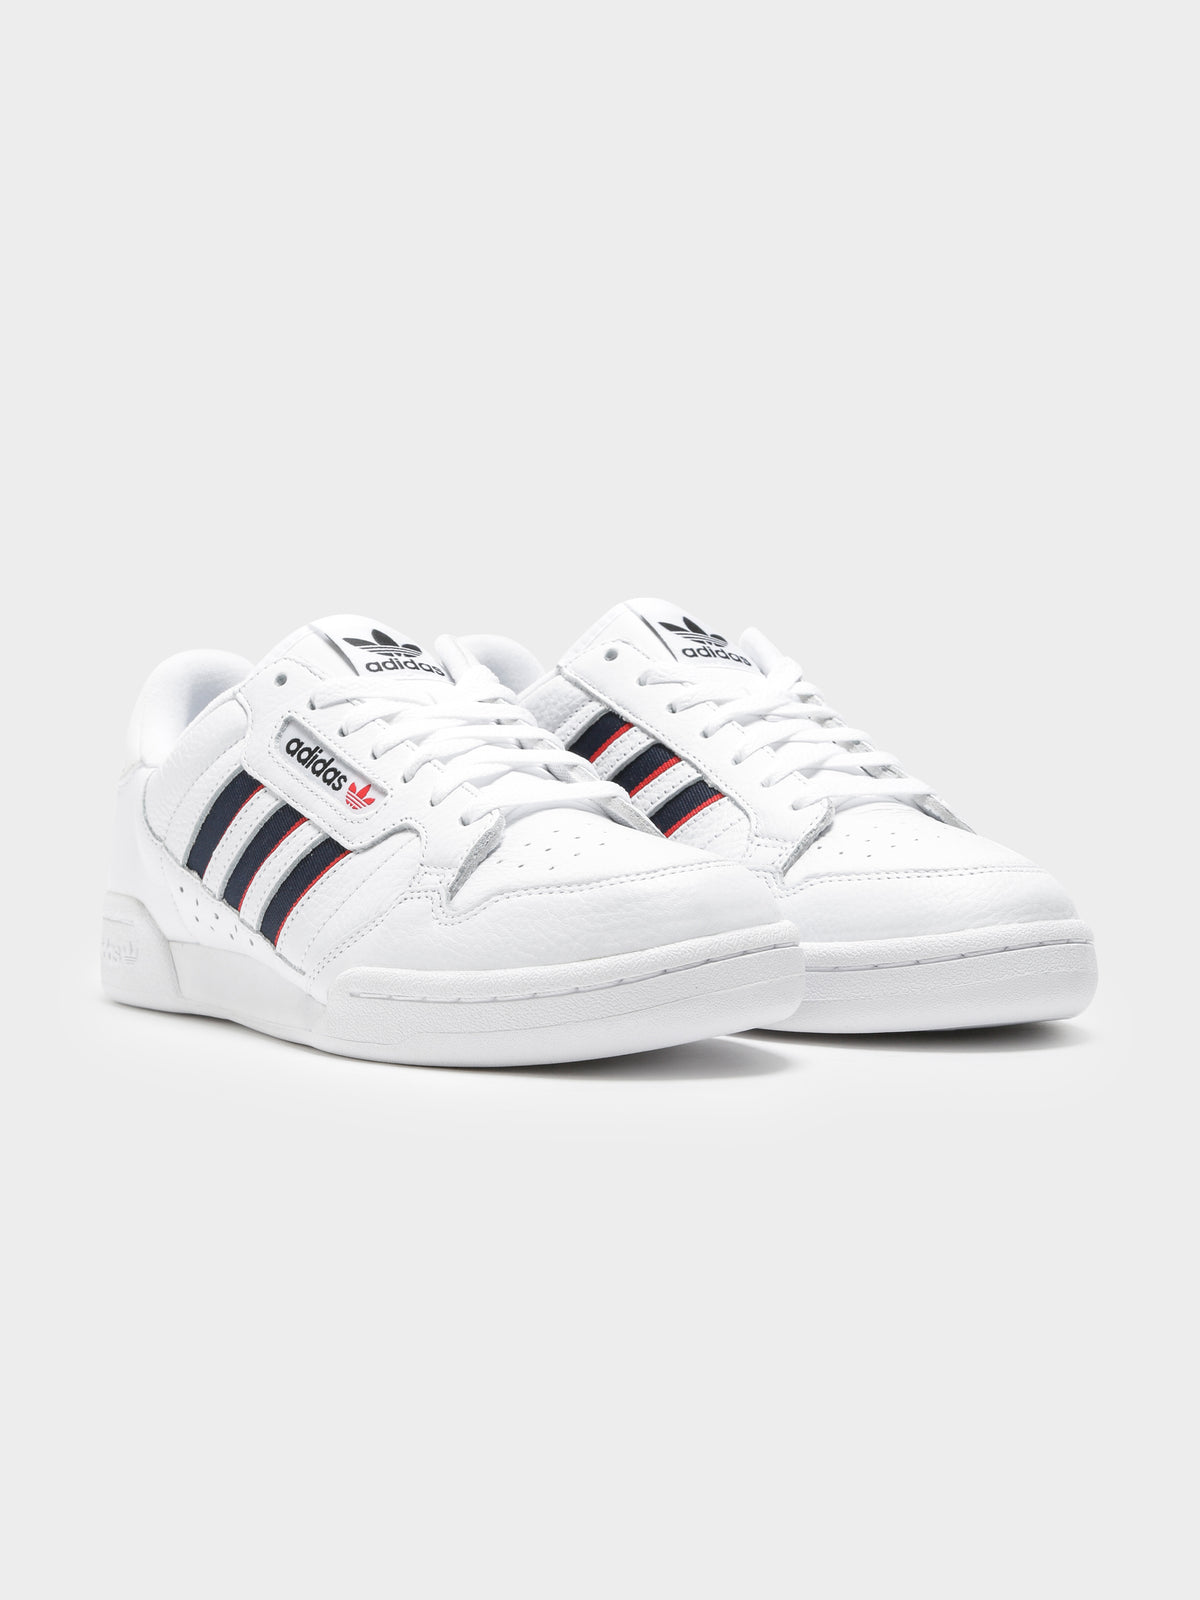 Mens Continental 80 Stripes Sneakers in Cloud White Collegiate Navy &amp; Vivid Red